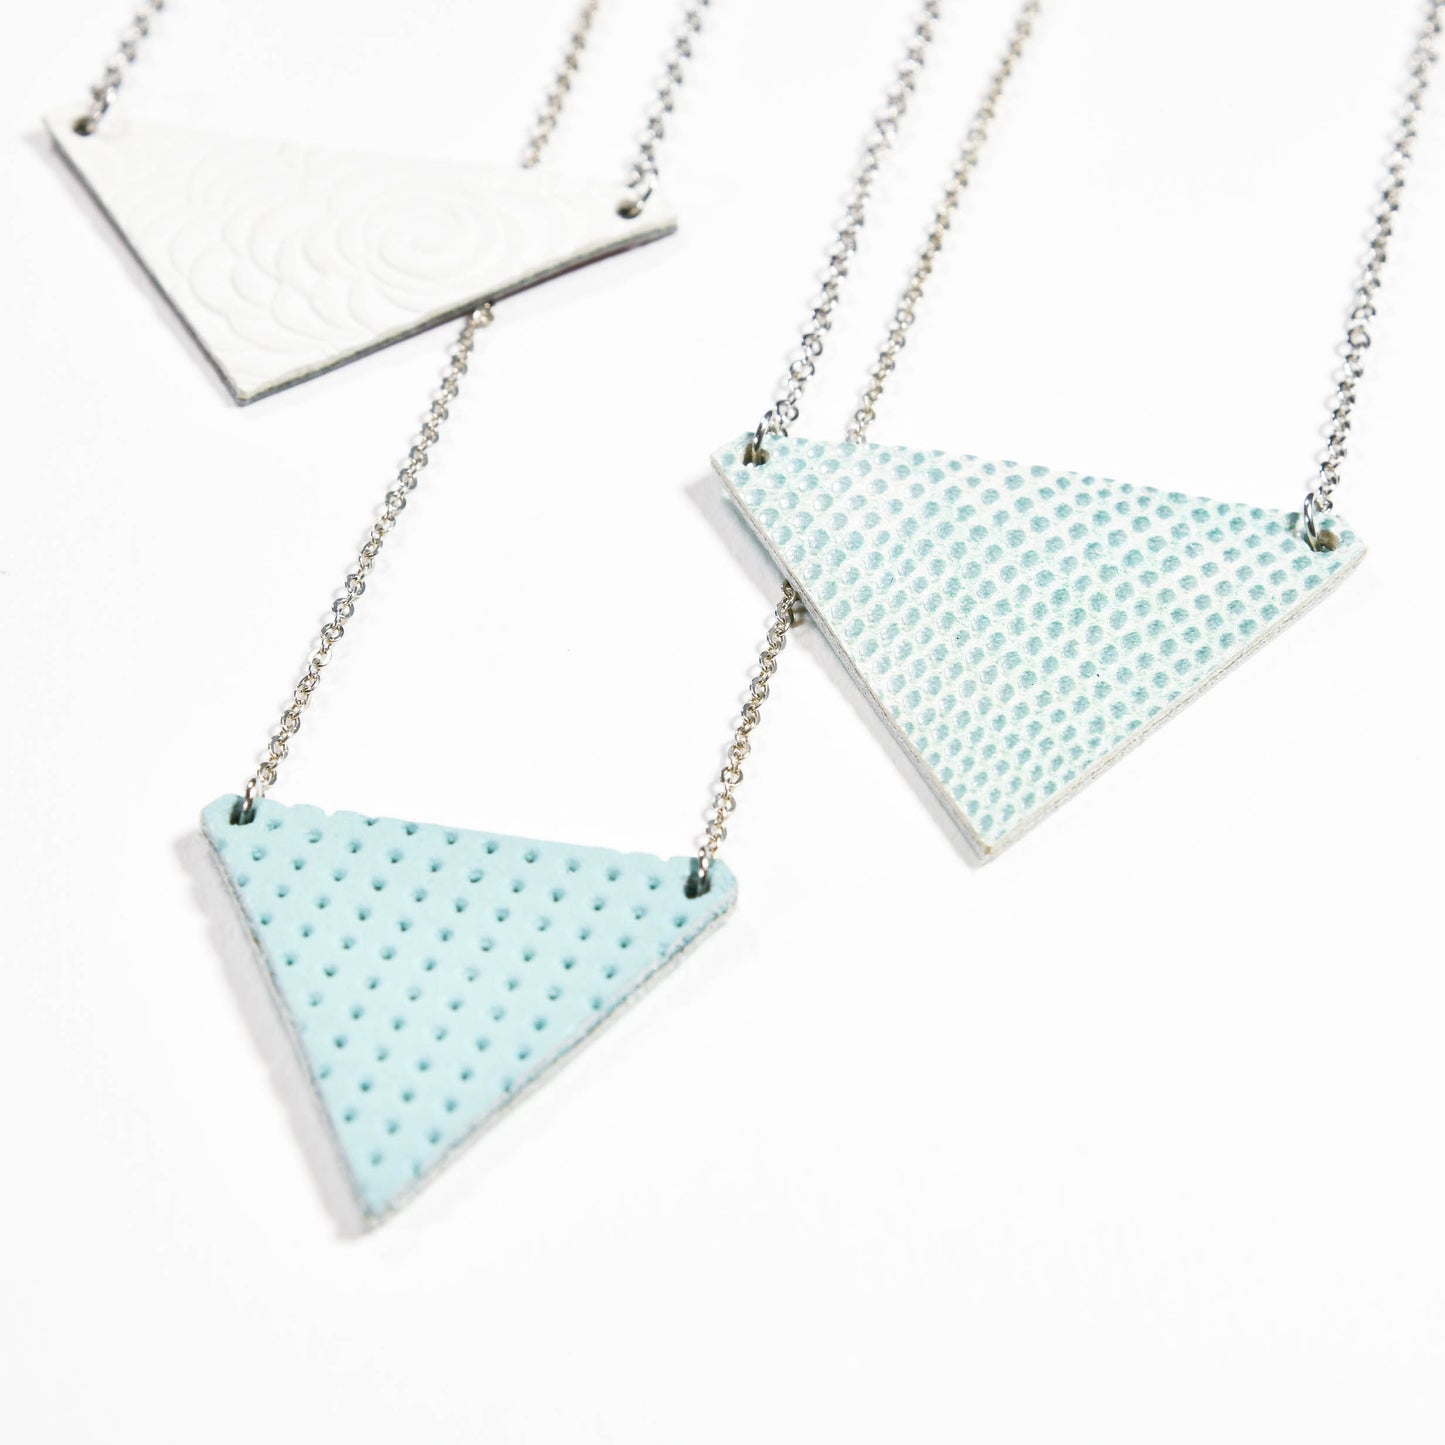 Textured turquoise triangle necklace